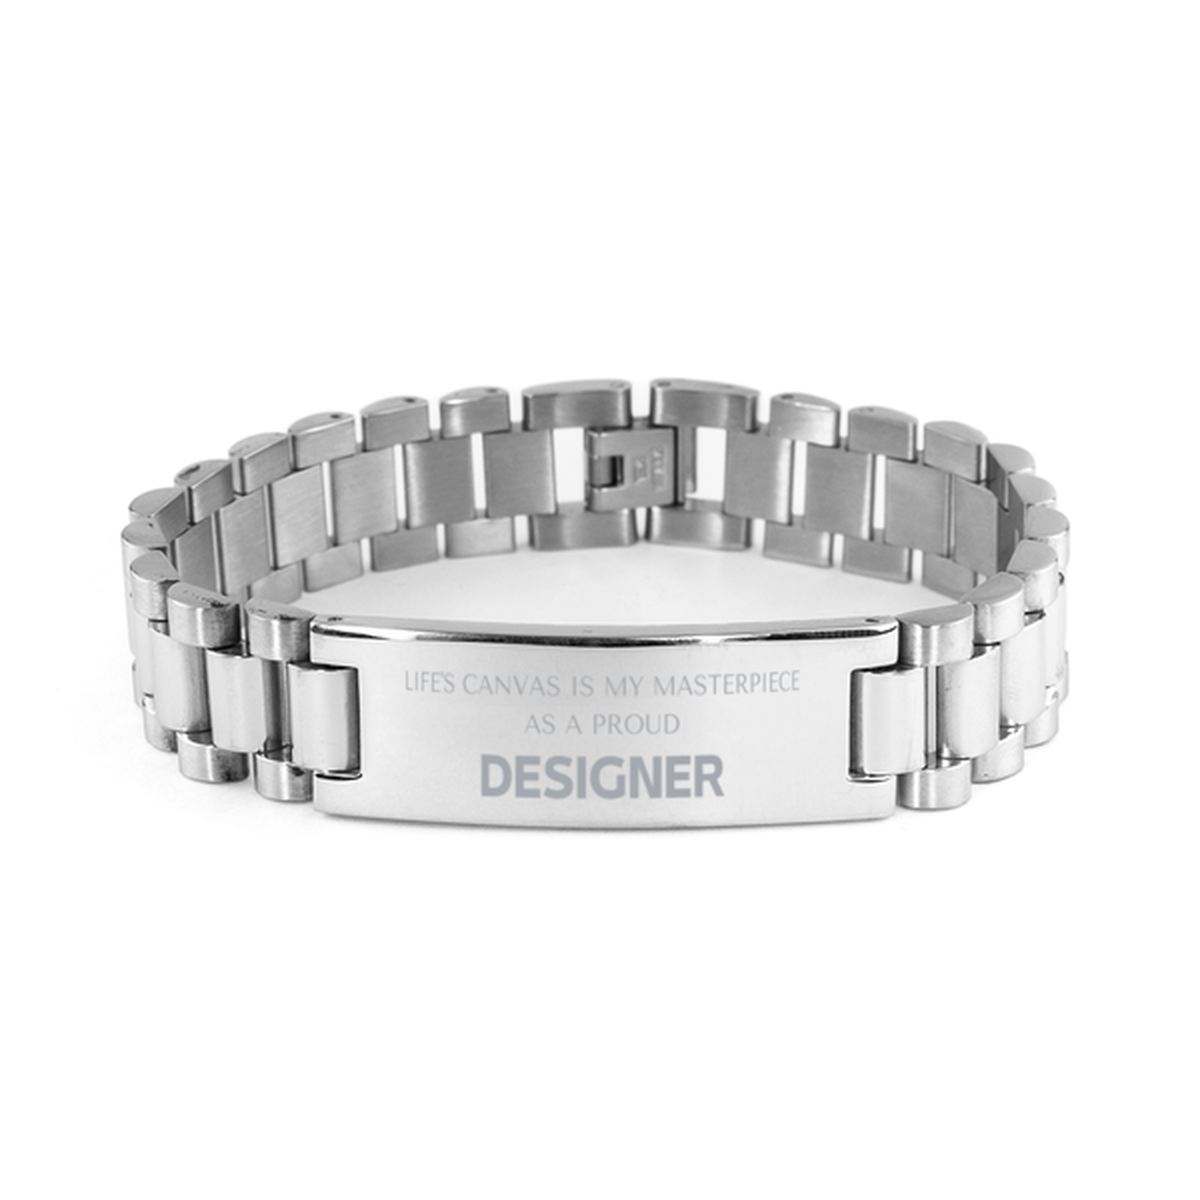 Proud Designer Gifts, Life's canvas is my masterpiece, Epic Birthday Christmas Unique Ladder Stainless Steel Bracelet For Designer, Coworkers, Men, Women, Friends